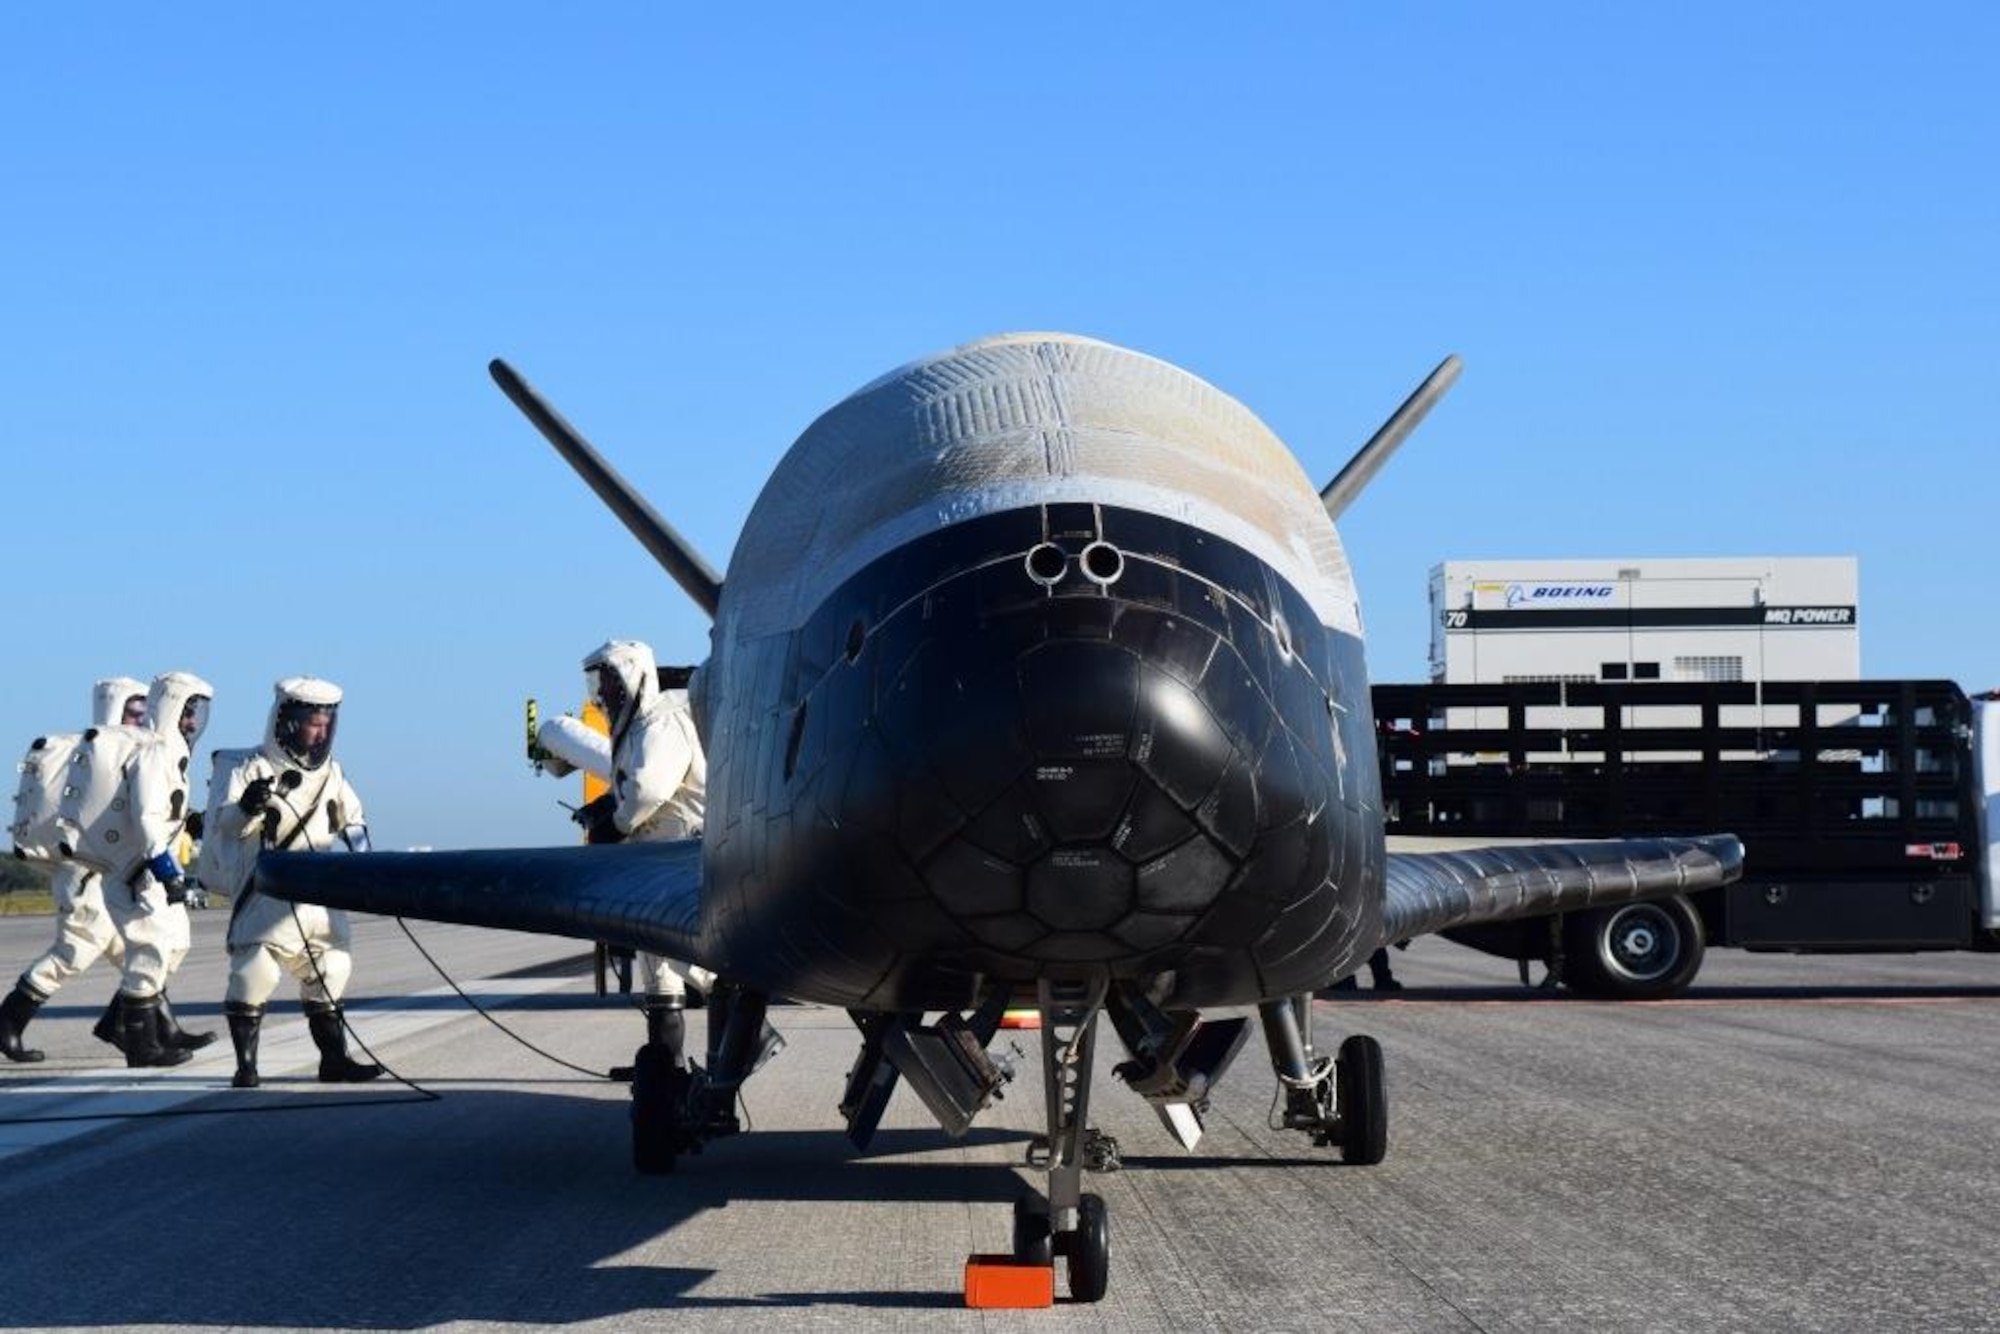 The Air Force's X-37B Orbital Test Vehicle mission 4 lands at NASA 's Kennedy Space Center Shuttle Landing Facility, Fla., May 7, 2017. Managed by the Air Force Rapid Capabilities Office, the X-37B program is the newest and most advanced re-entry spacecraft that performs risk reduction, experimentation and concept of operations development for reusable space vehicle technologies. (U.S. Air Force courtesy photo)